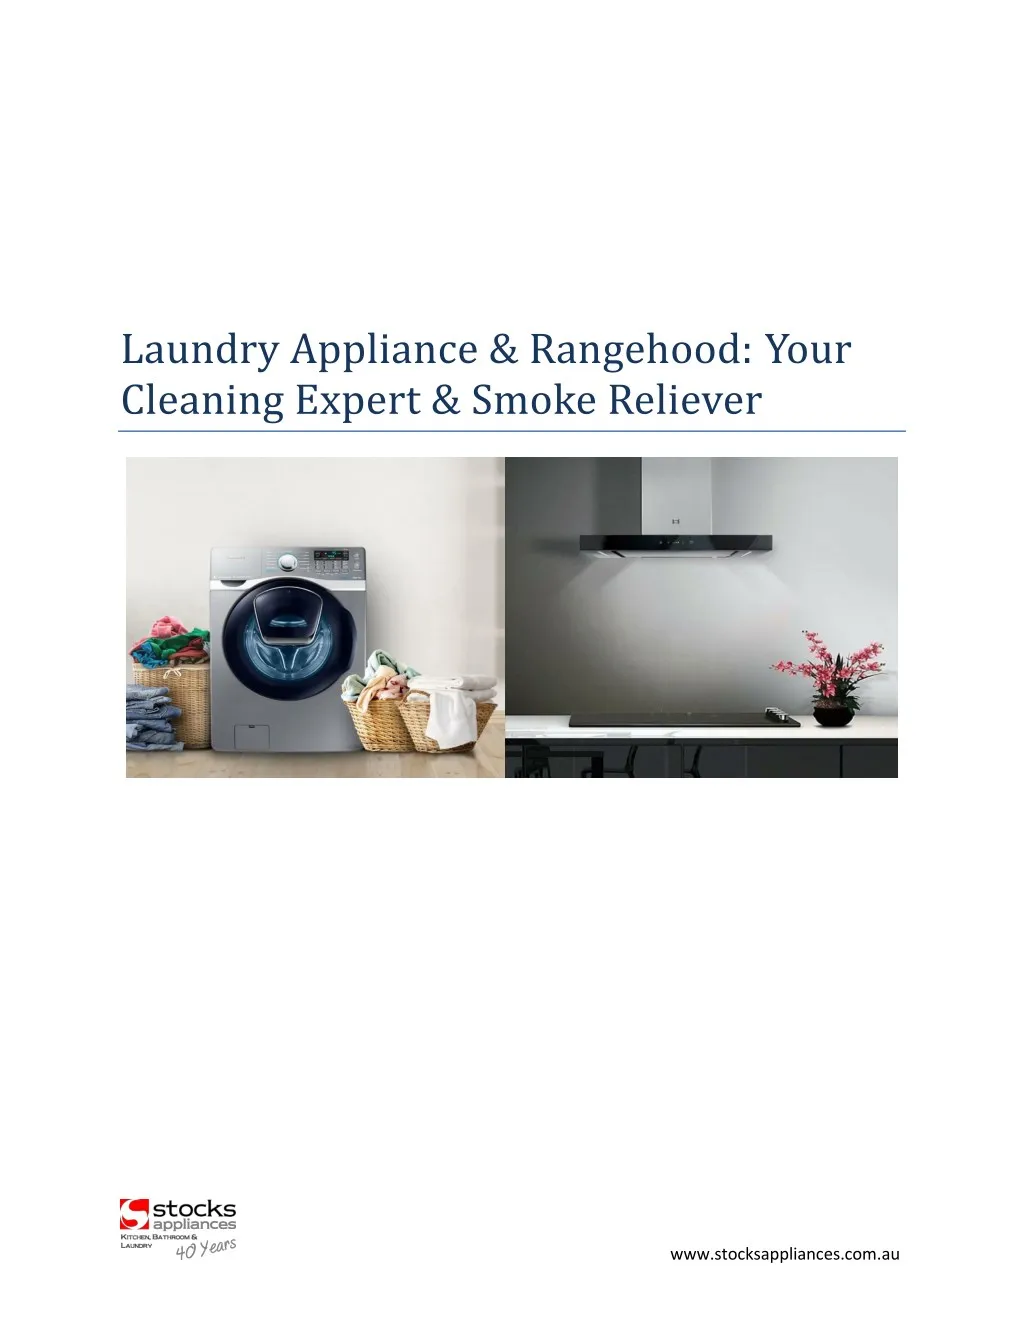 laundry appliance rangehood your cleaning expert